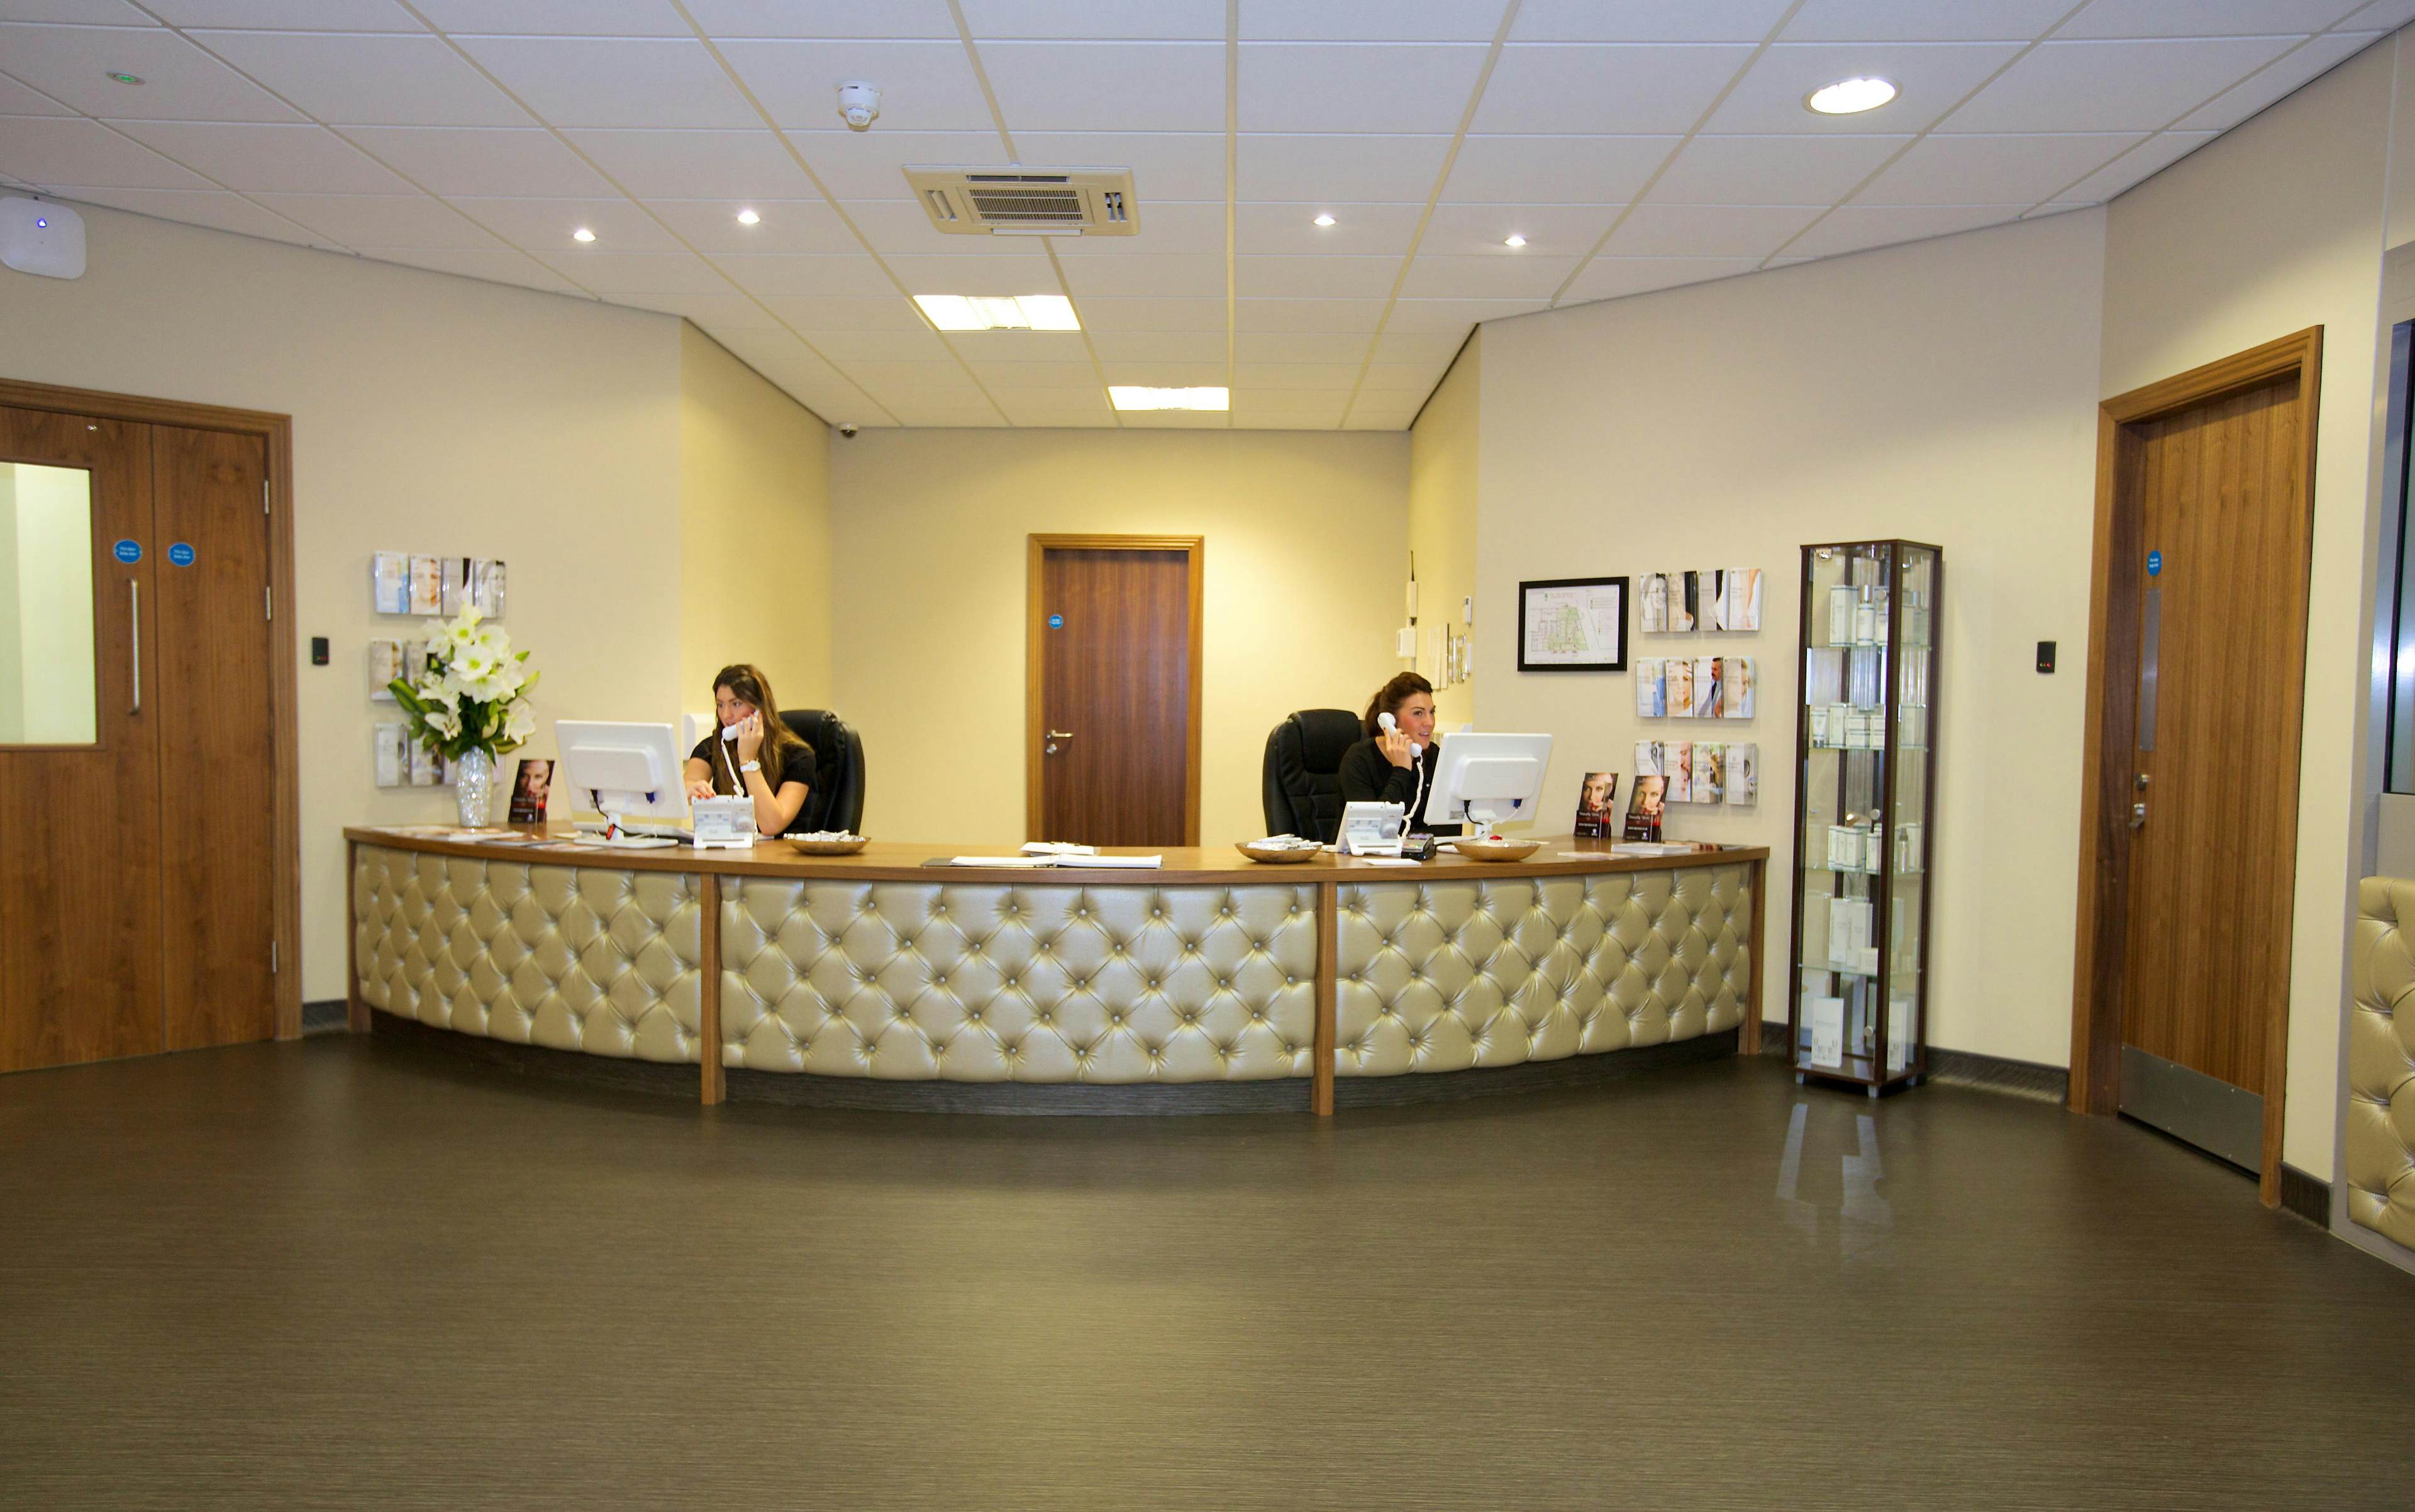 Pall Mall Medical & Cosmetic - Rooms for Hire  image 1